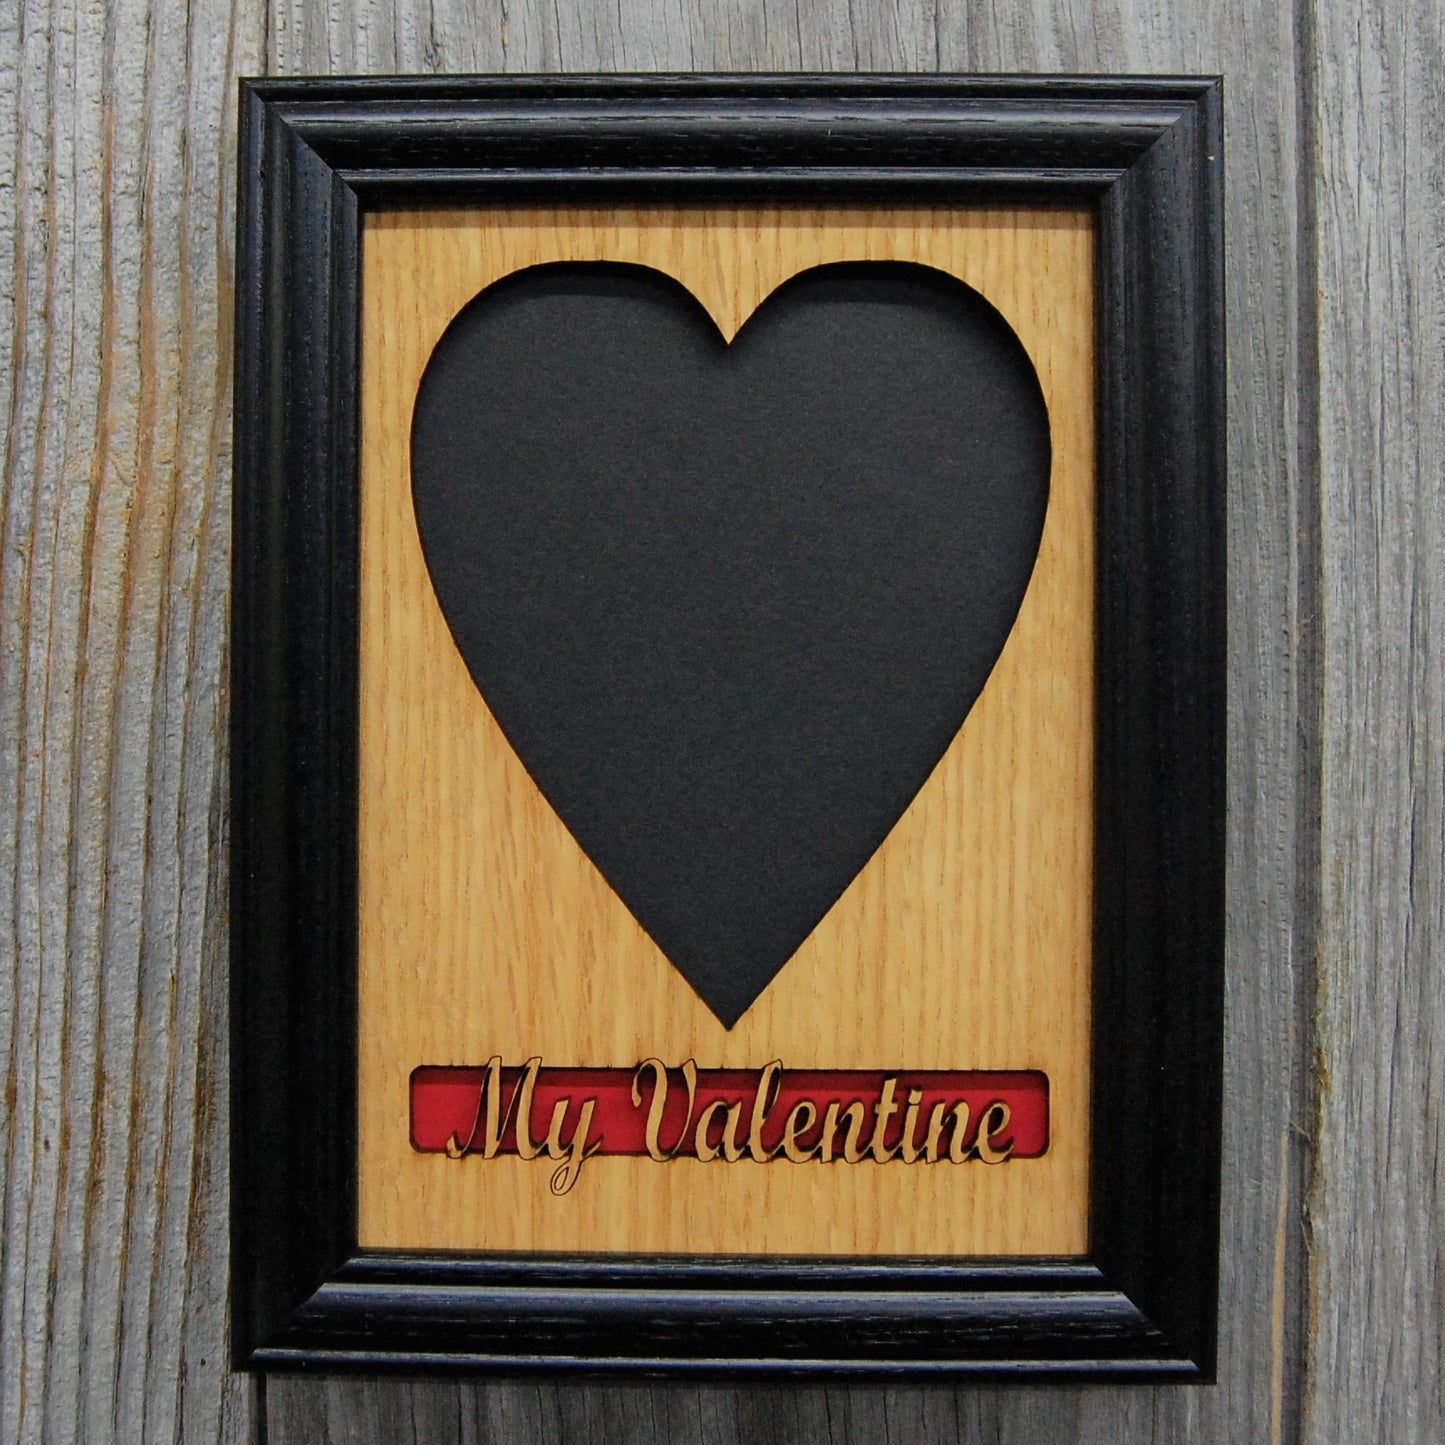 My Valentines Picture Frame - 5x7  Frame Holds 1 or 2 Photos